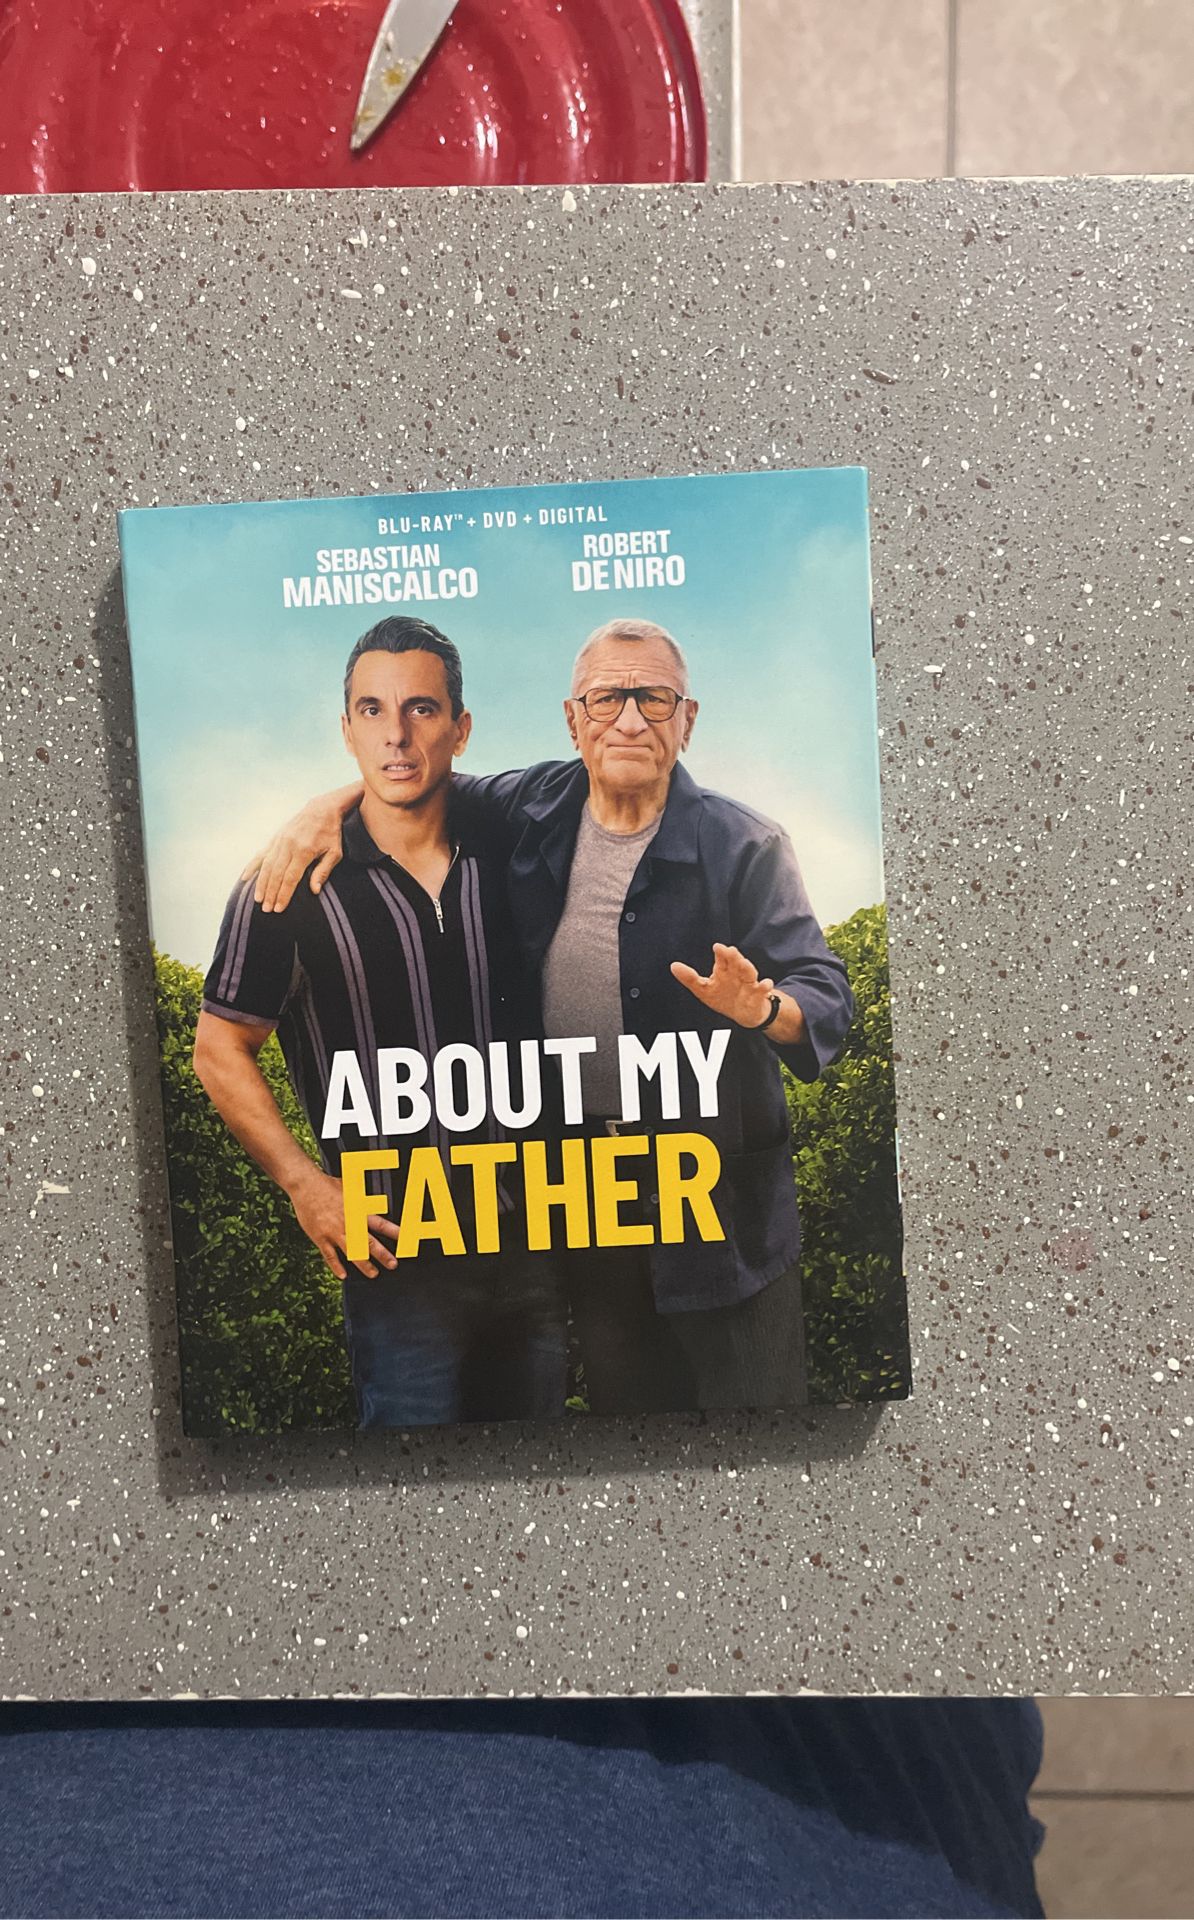 About My Father Blu-Ray + DVD